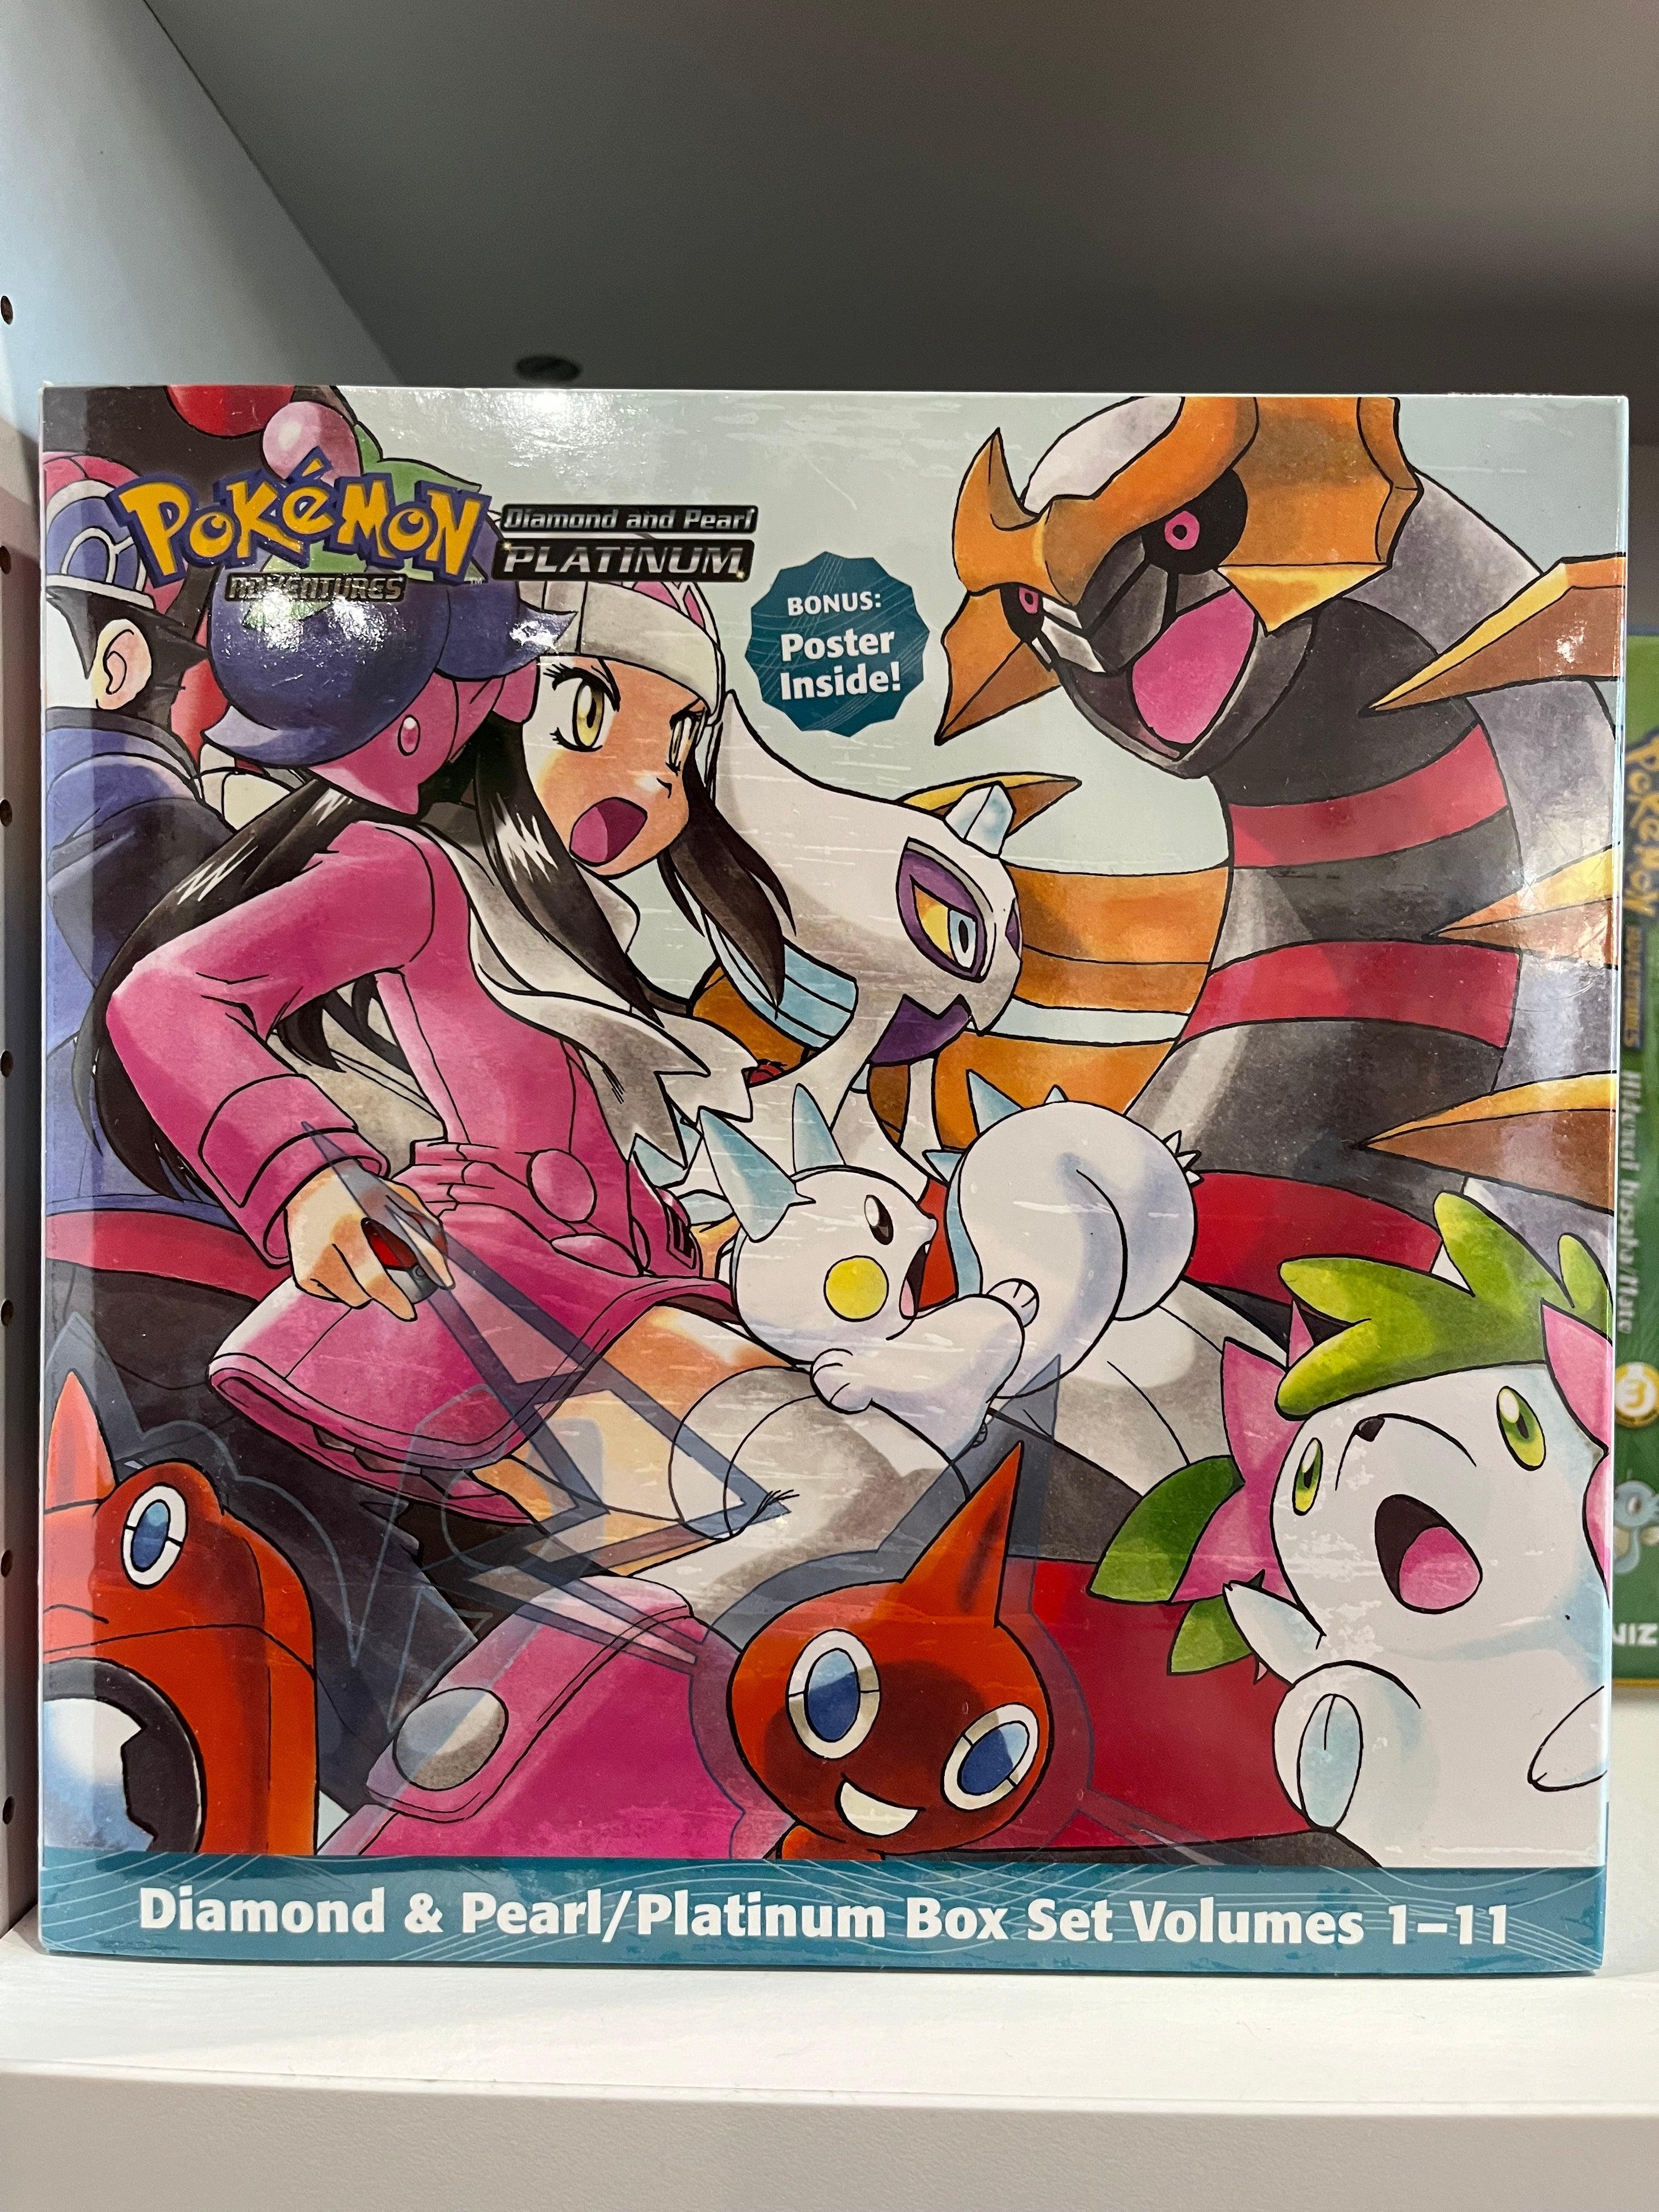 VideoGameArt&Tidbits on X: Pokémon Adventures: Diamond and Pearl Platinum  Vol 1 - cover artwork and art assets that make up the composition.   / X